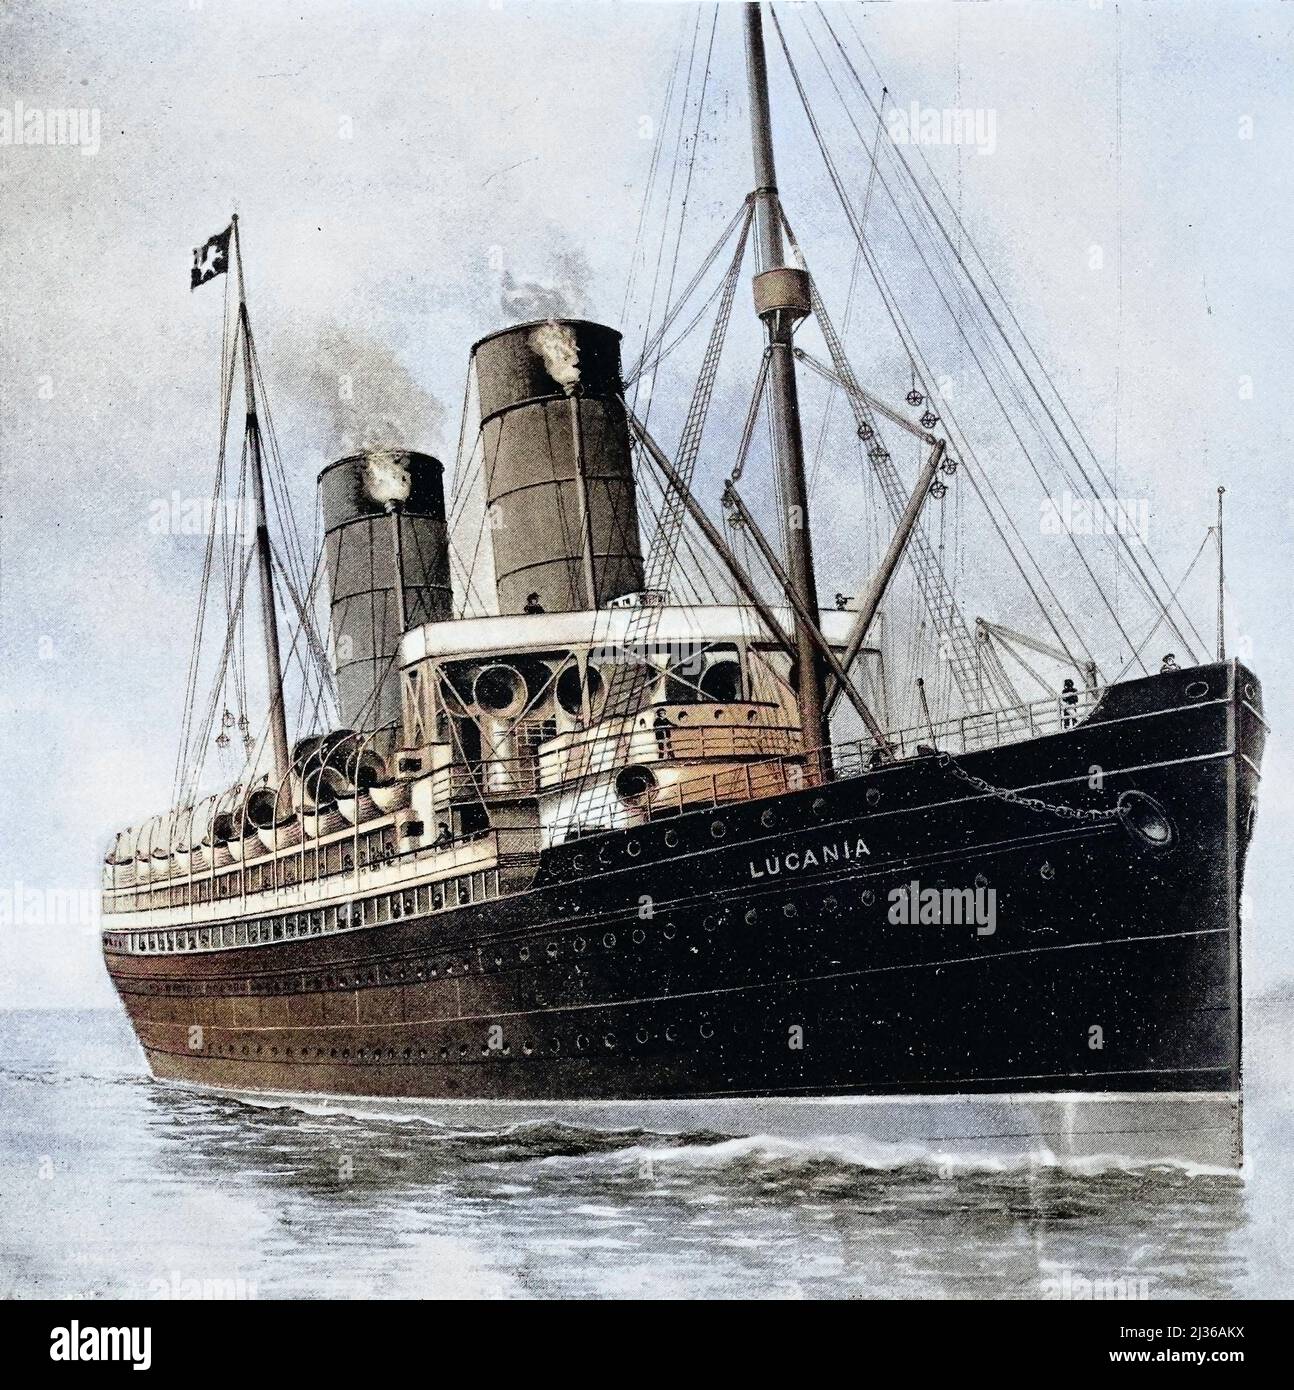 RMS Lucania was a British ocean liner owned by the Cunard Steamship Line Shipping Company, built by Fairfield Shipbuilding & Engineering Company of Govan, Scotland, and launched on Thursday, 2 February 1893. Identical in dimensions and specifications to her sister ship and running mate RMS Campania, RMS Lucania was the joint largest passenger liner afloat when she entered service in 1893. On her second voyage, she won the prestigious Blue Riband from the other Cunarder to become the fastest passenger liner afloat, a title she kept until 1898. from the book ' Steam vessels and marine engines ' Stock Photo